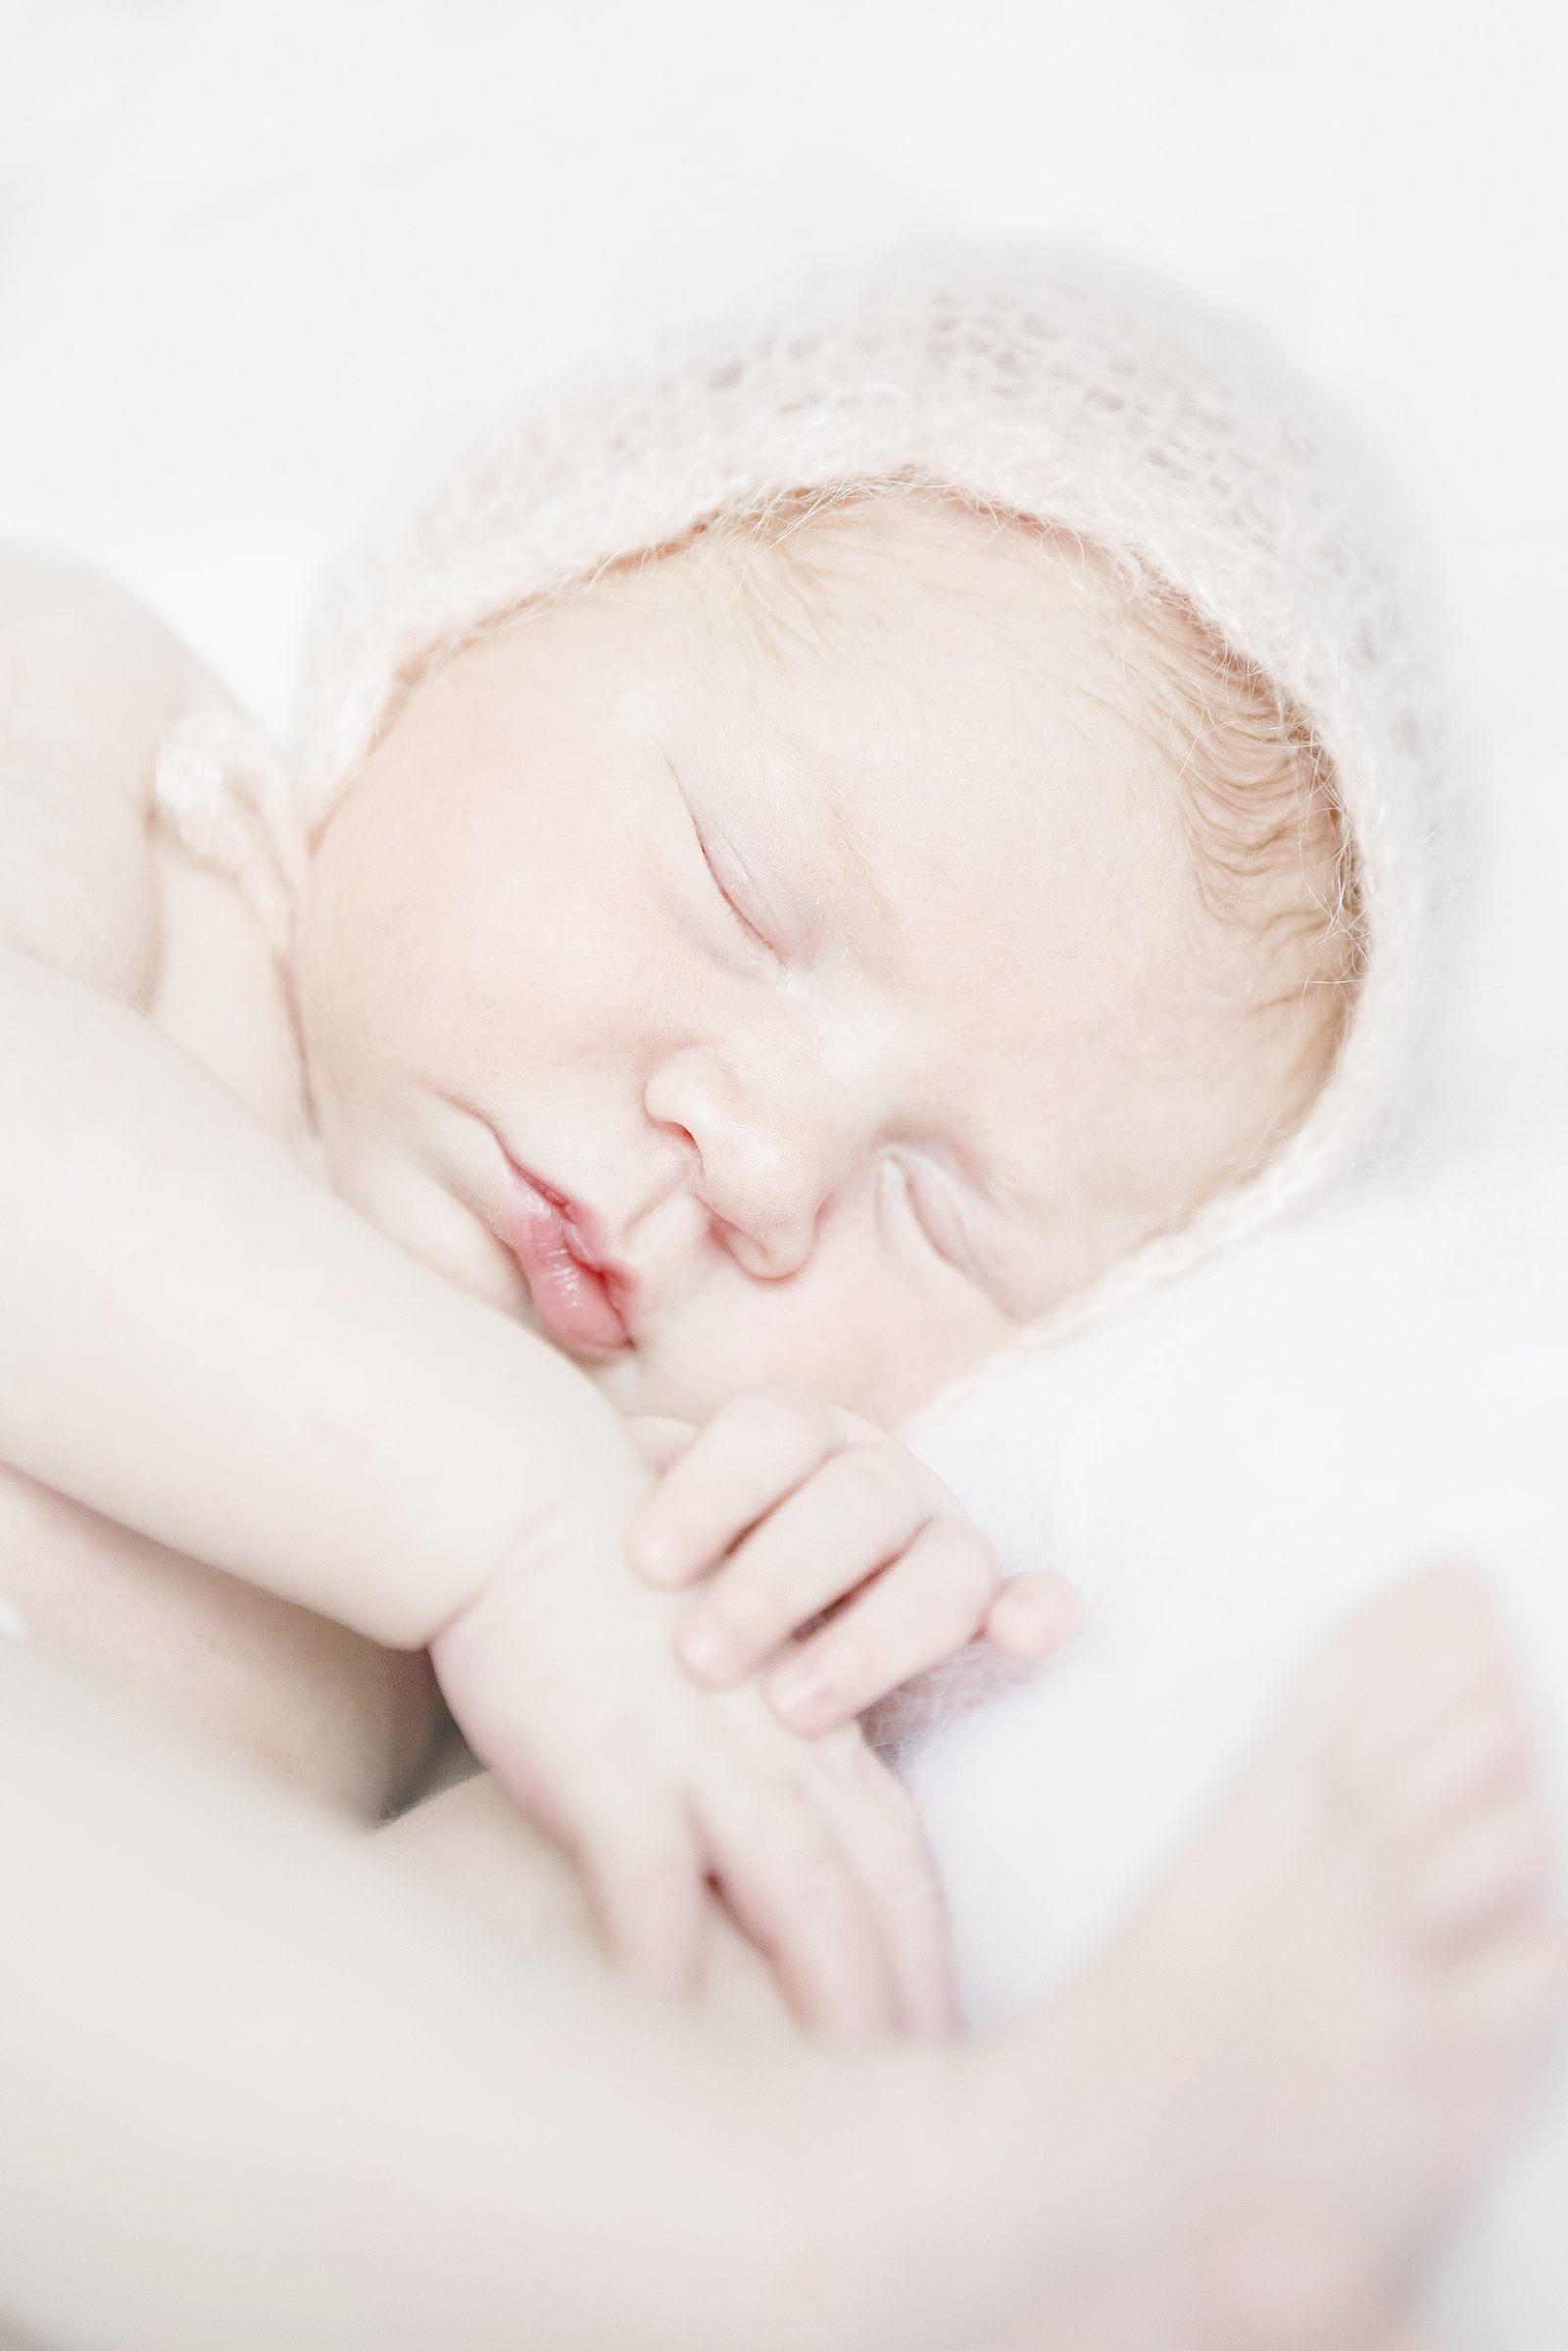 minimal props, bright and airy newborn baby girls photography on white background